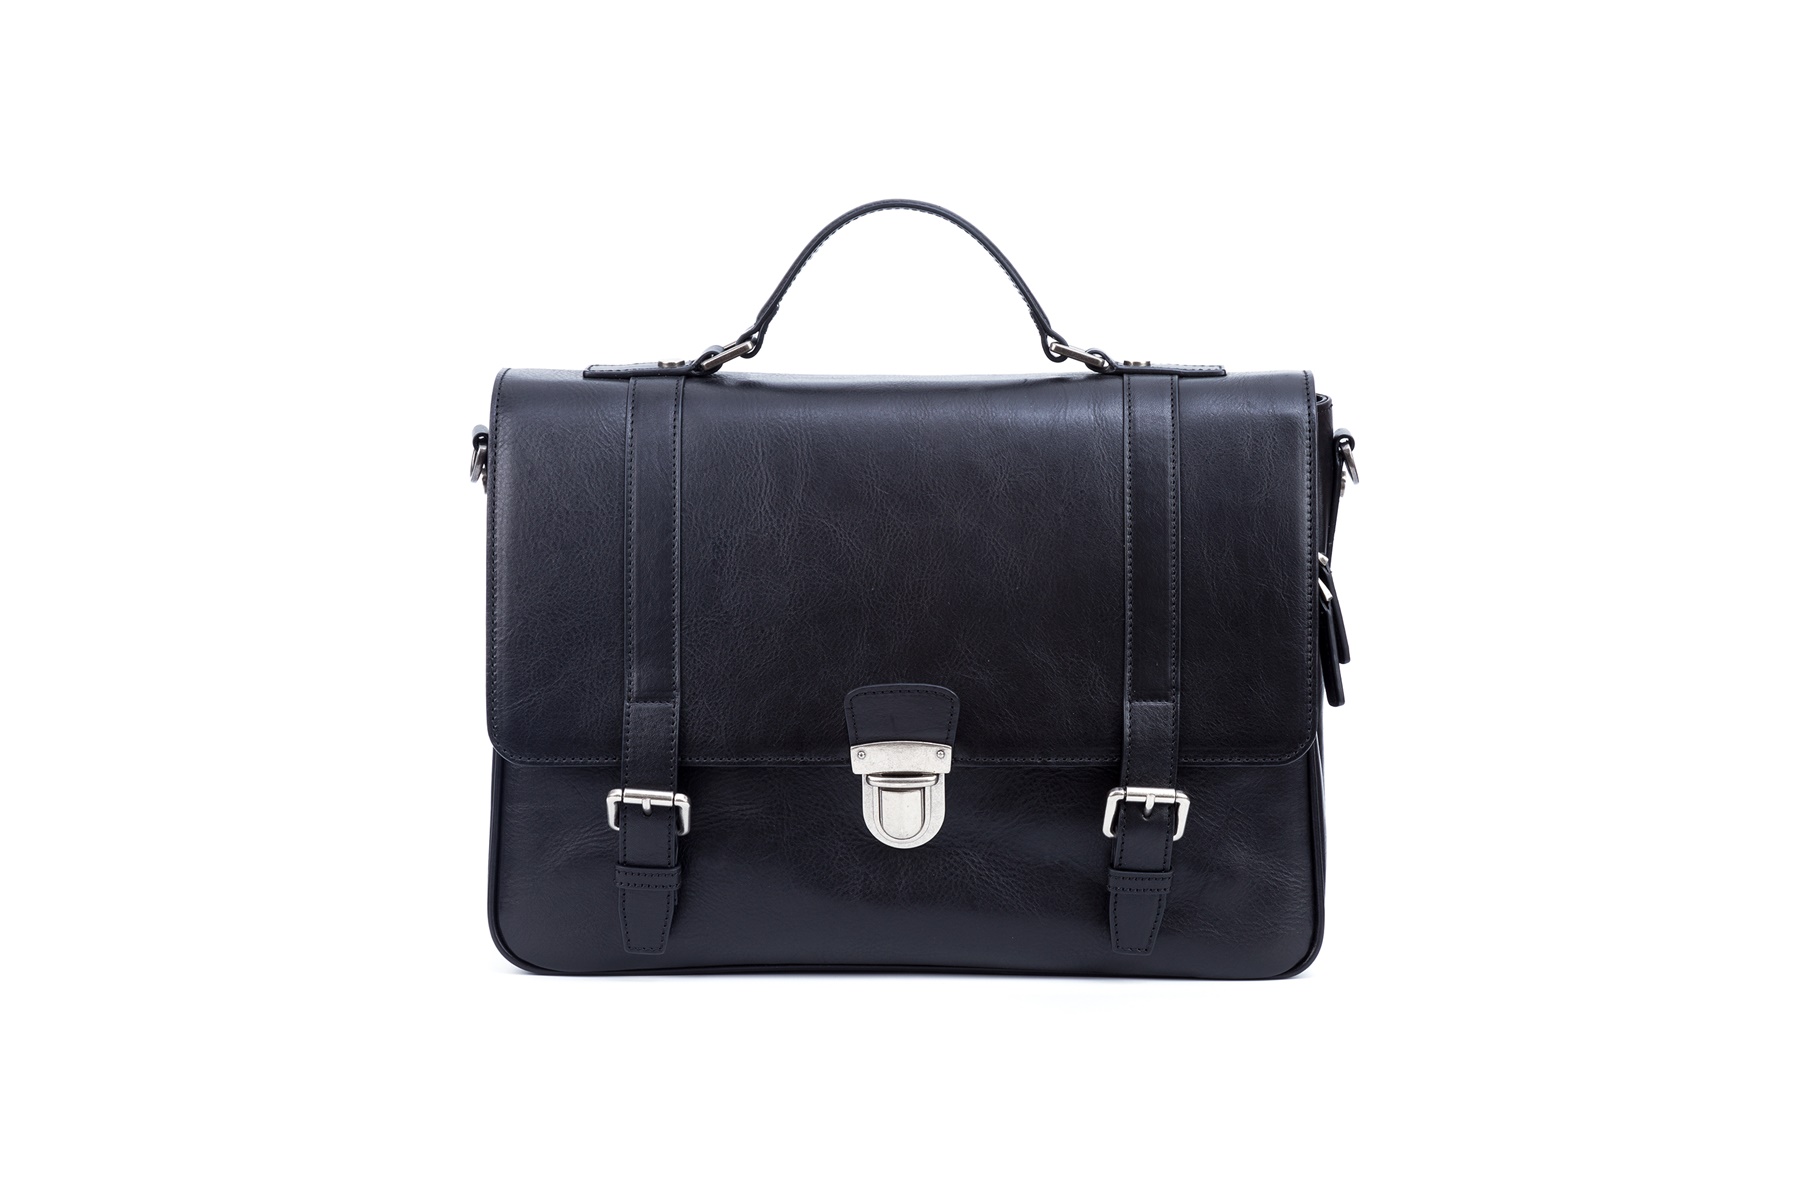 GF bags-Find Business Bag Mens Fashion Messenger Bag From GF Bags